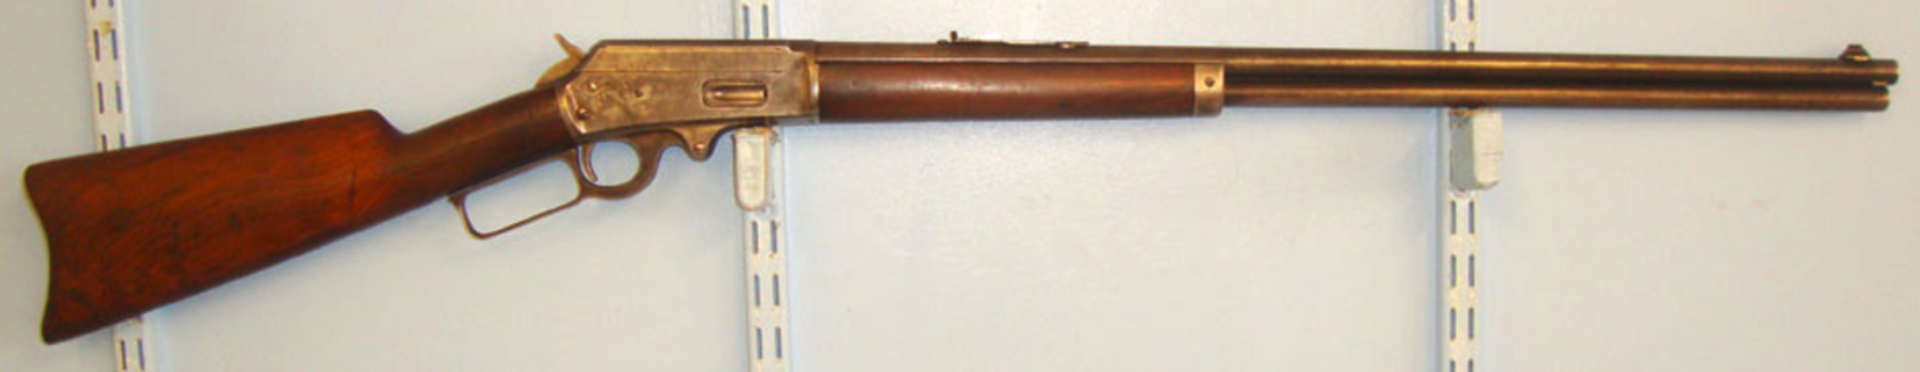 Marlin Safety Model 1893 .32-40 Obsolete Calibre Lever Action Rifle With Tube Magazine. - Image 2 of 3